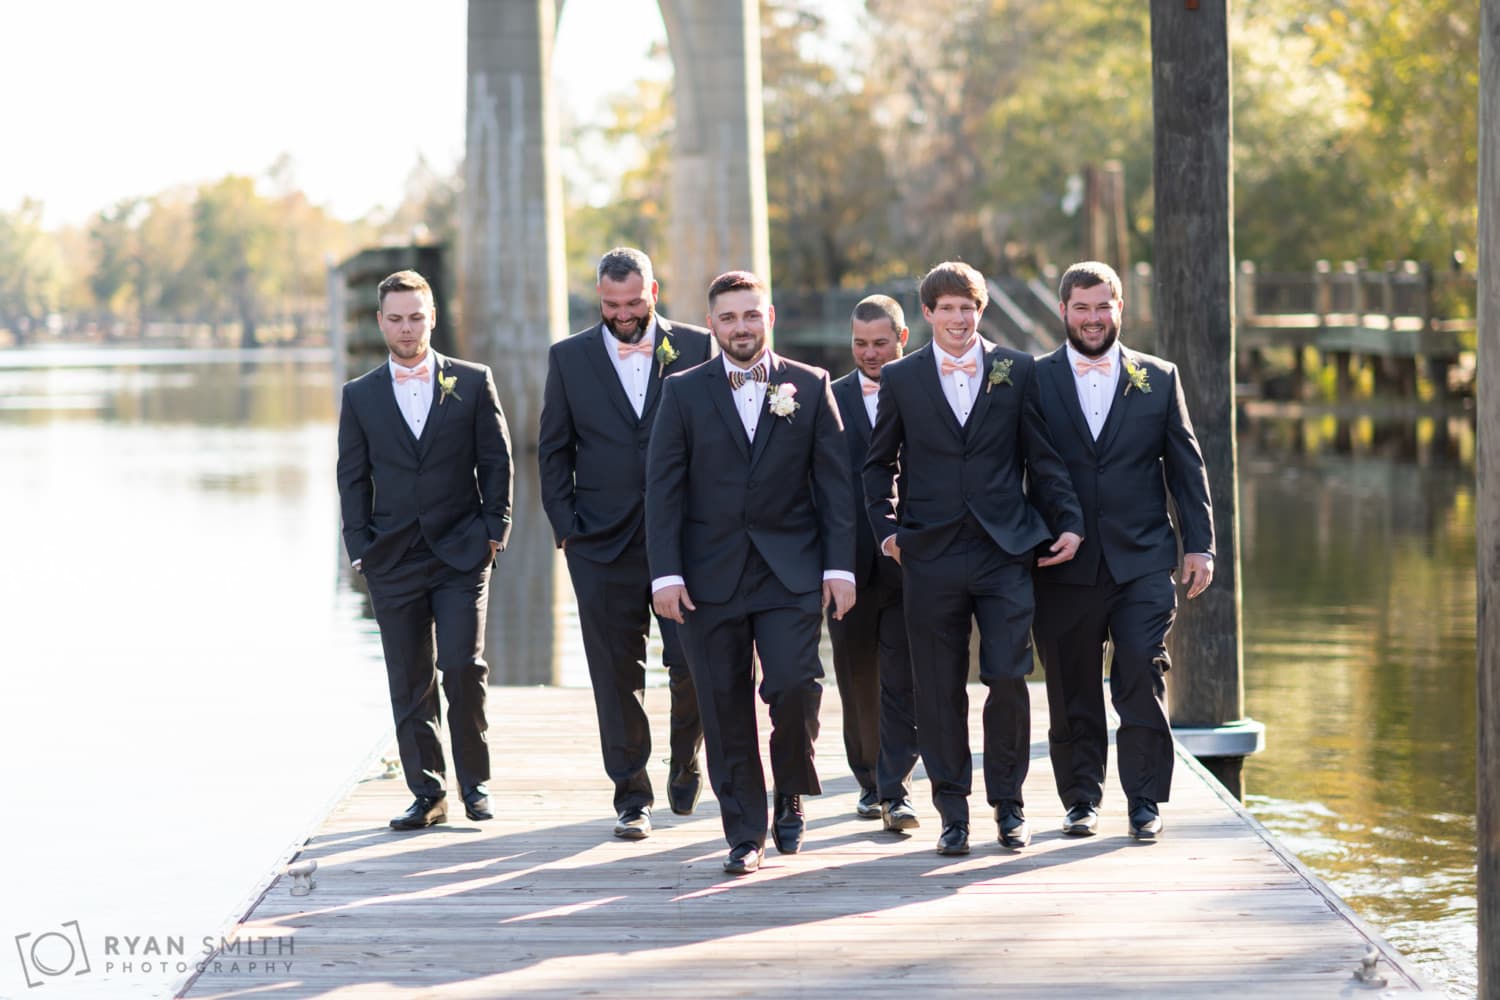 Groomsmen walking down the dock together - Conway River Walk